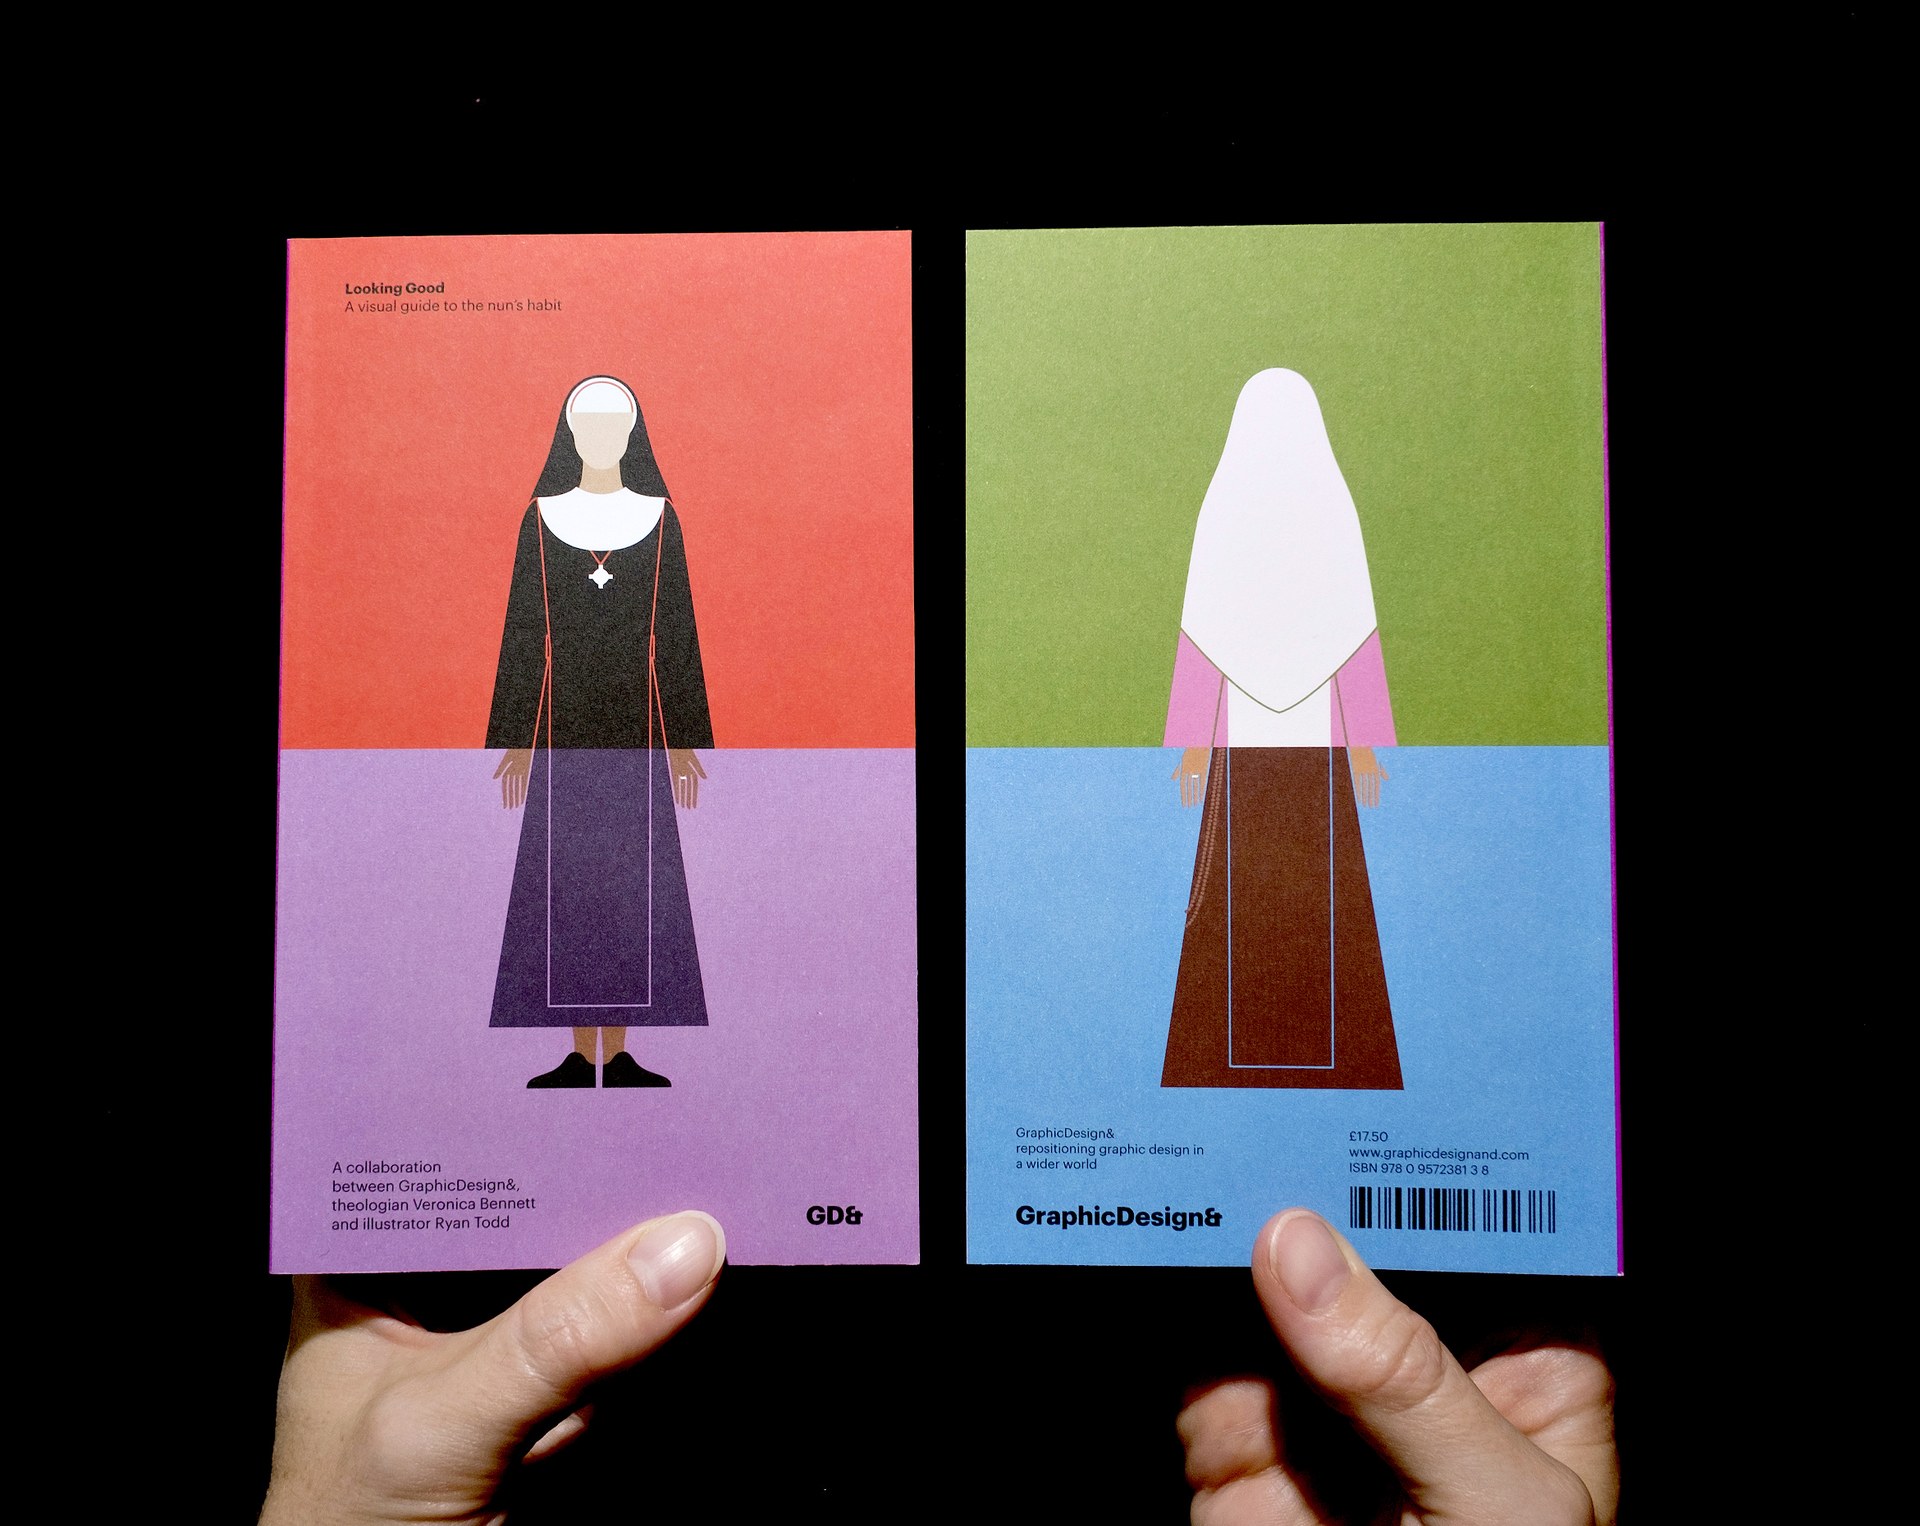 The book is a visual guide to the nun’s habit and tells the stories behind ...